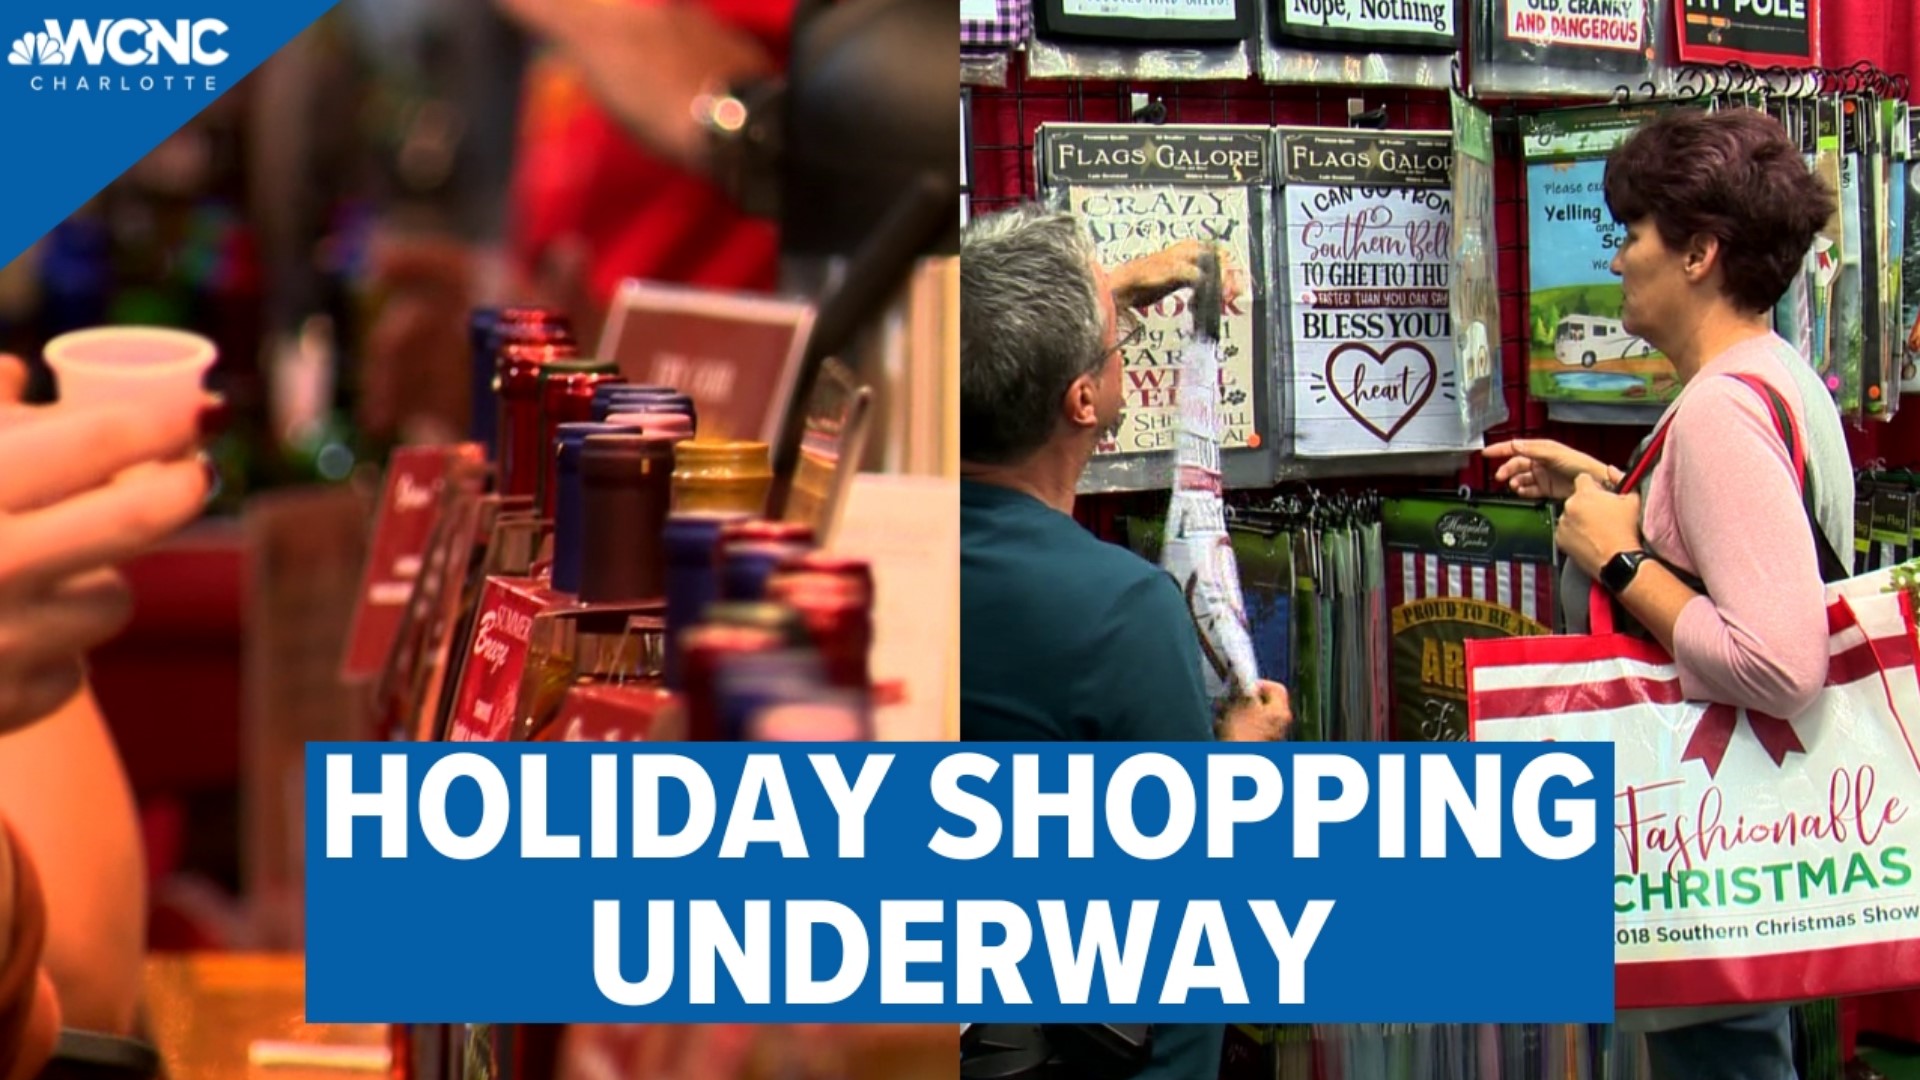 The holiday season is approaching and businesses are gearing up for sales.